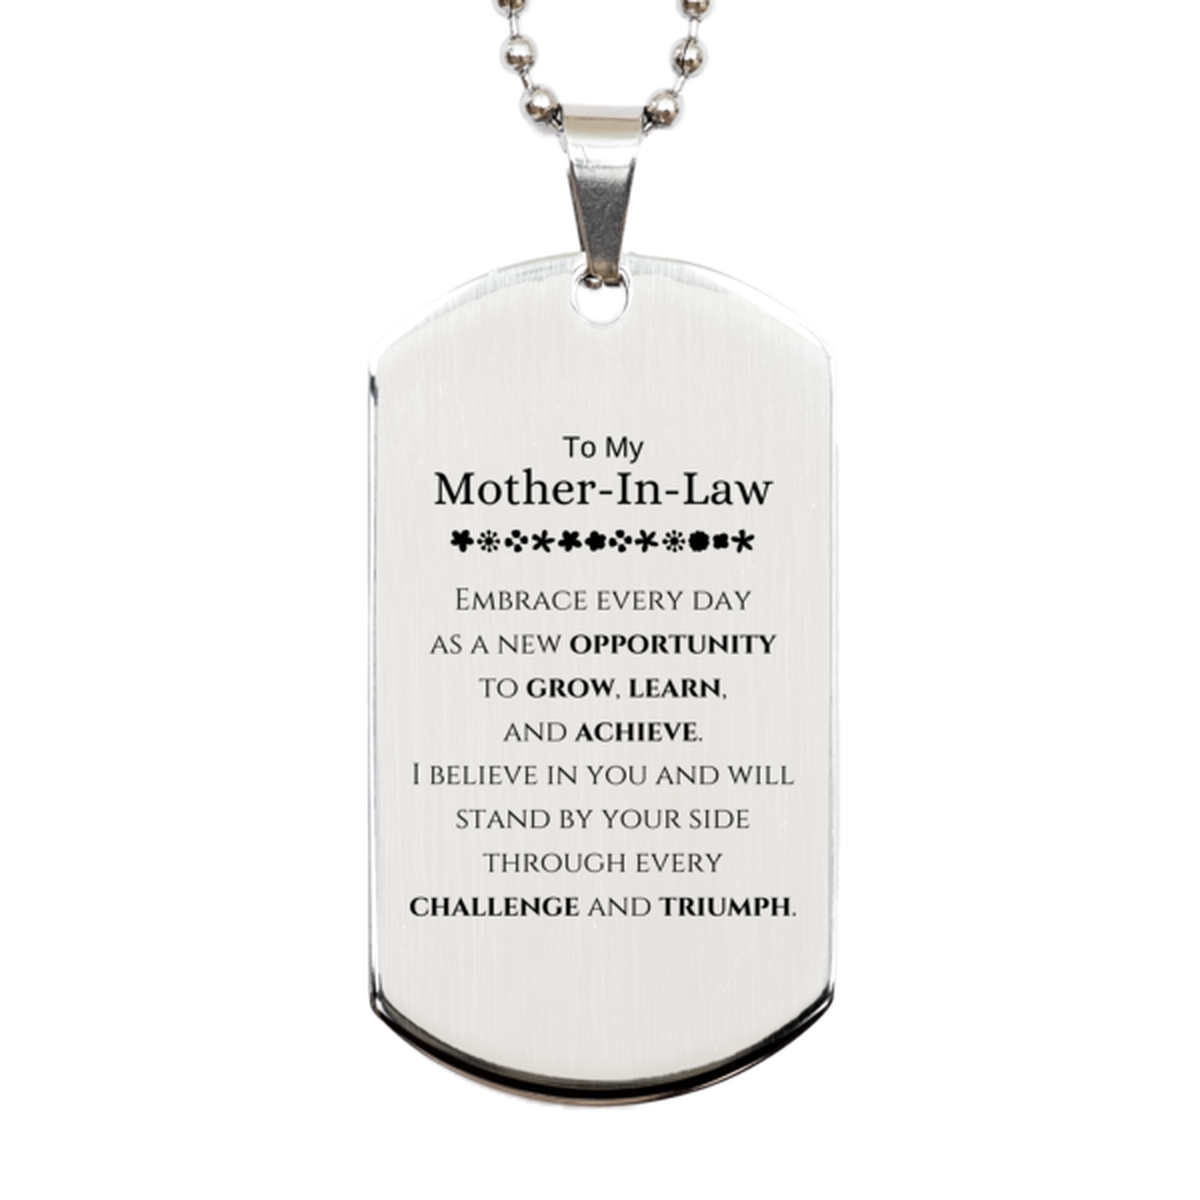 To My Mother-In-Law Gifts, I believe in you and will stand by your side, Inspirational Silver Dog Tag For Mother-In-Law, Birthday Christmas Motivational Mother-In-Law Gifts